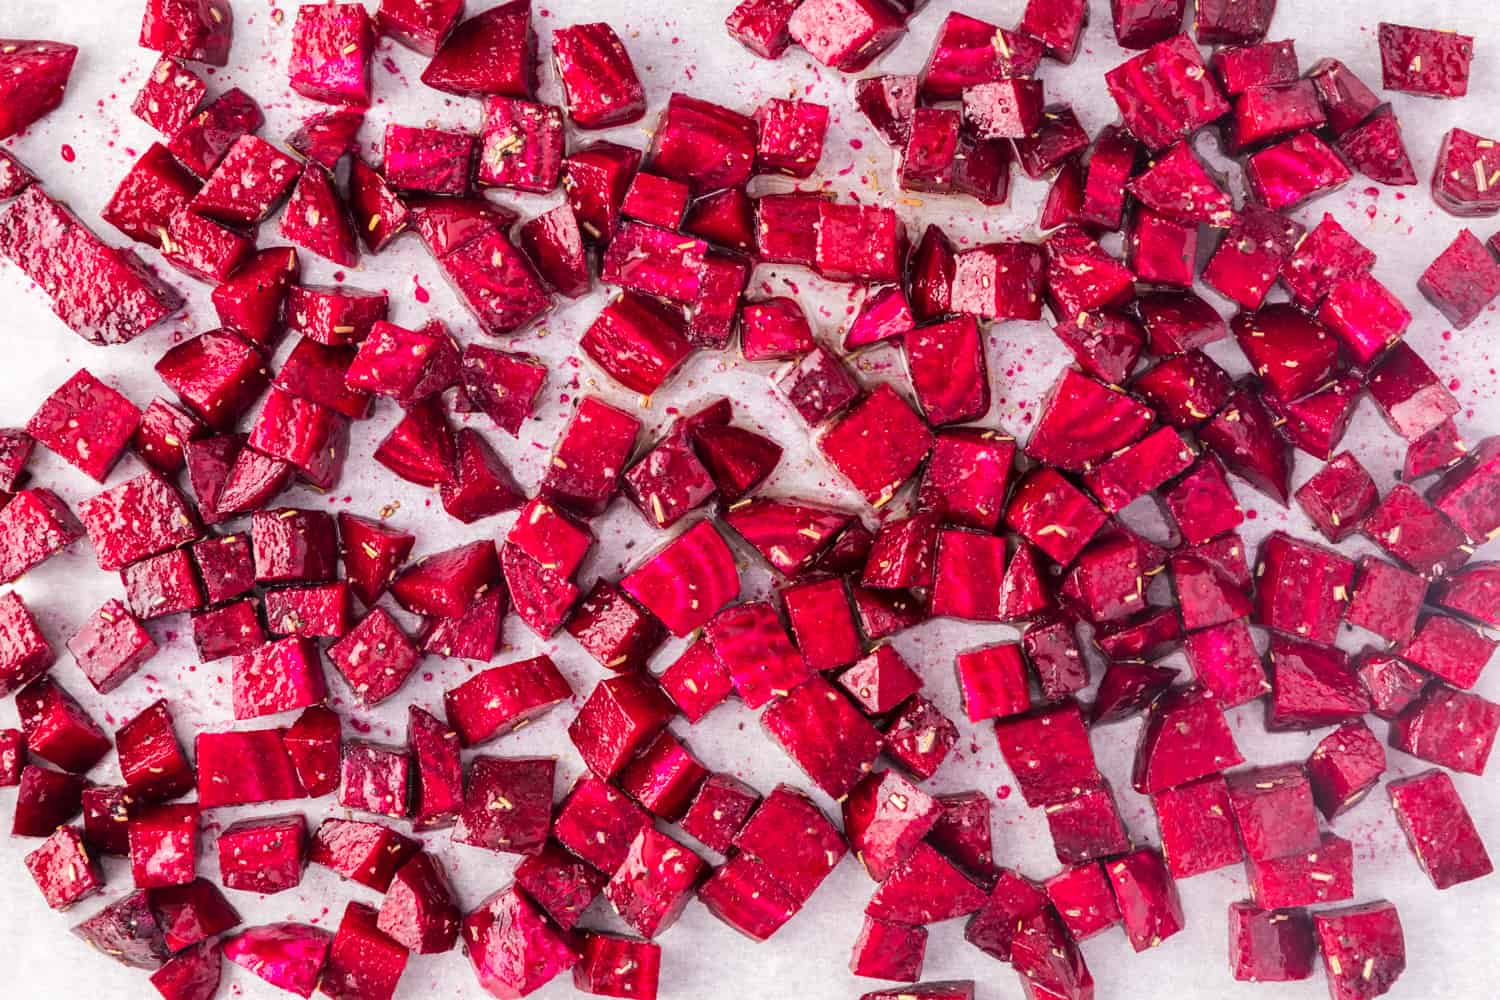 Uncooked diced beets on a sheet pan, ready to be roasted.